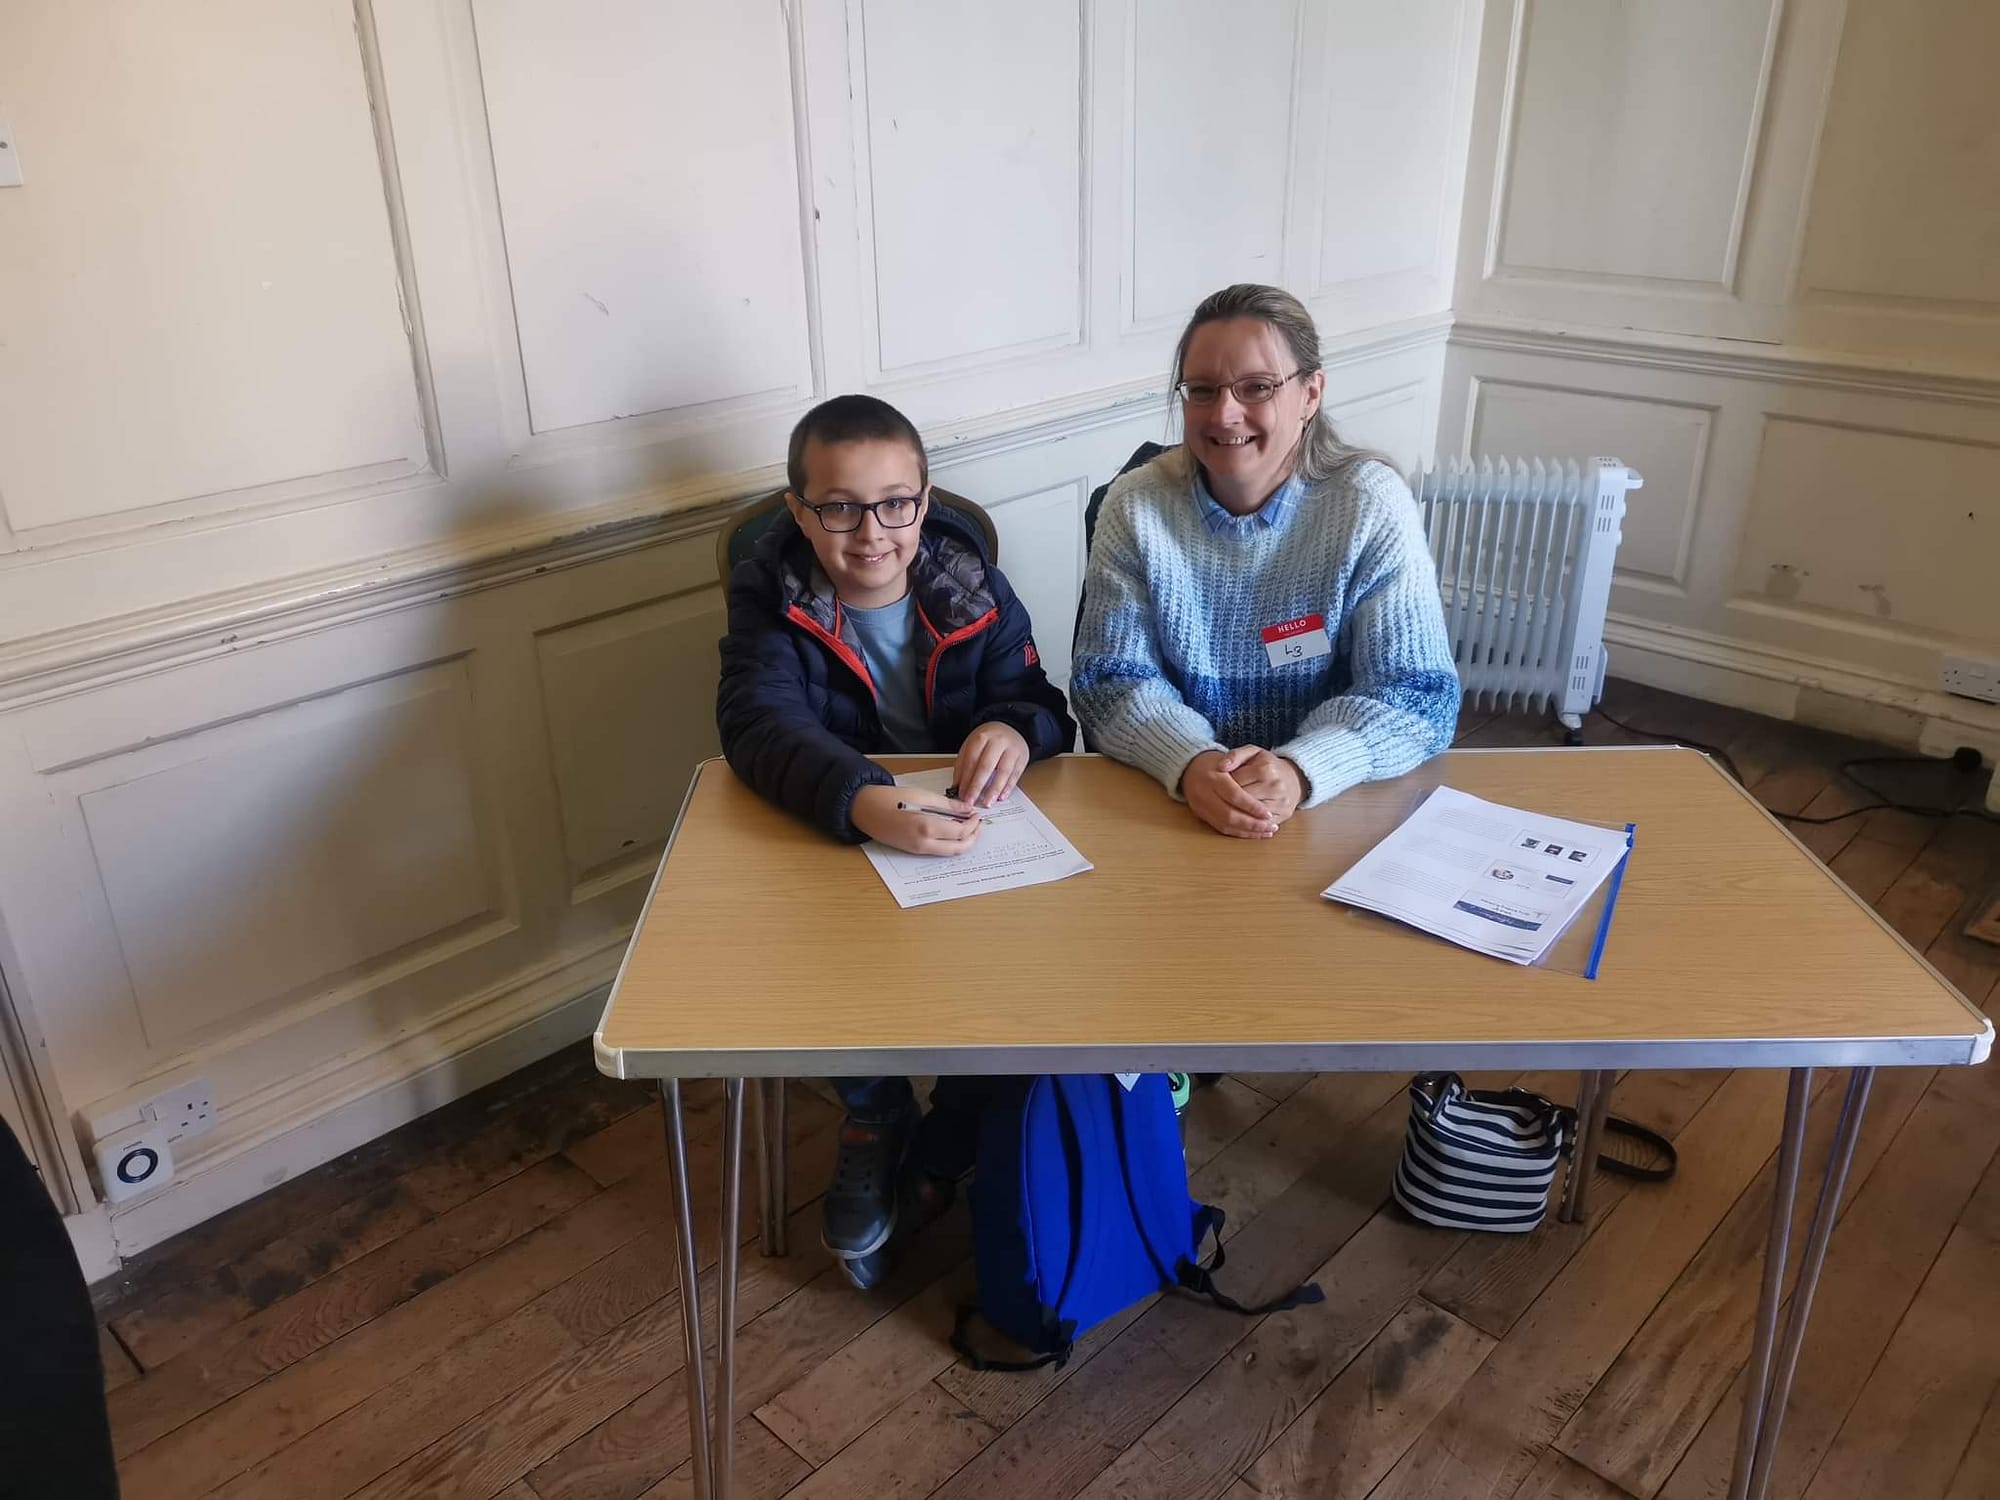 A young boy and his mum attending Anstice Brown's writing workshop